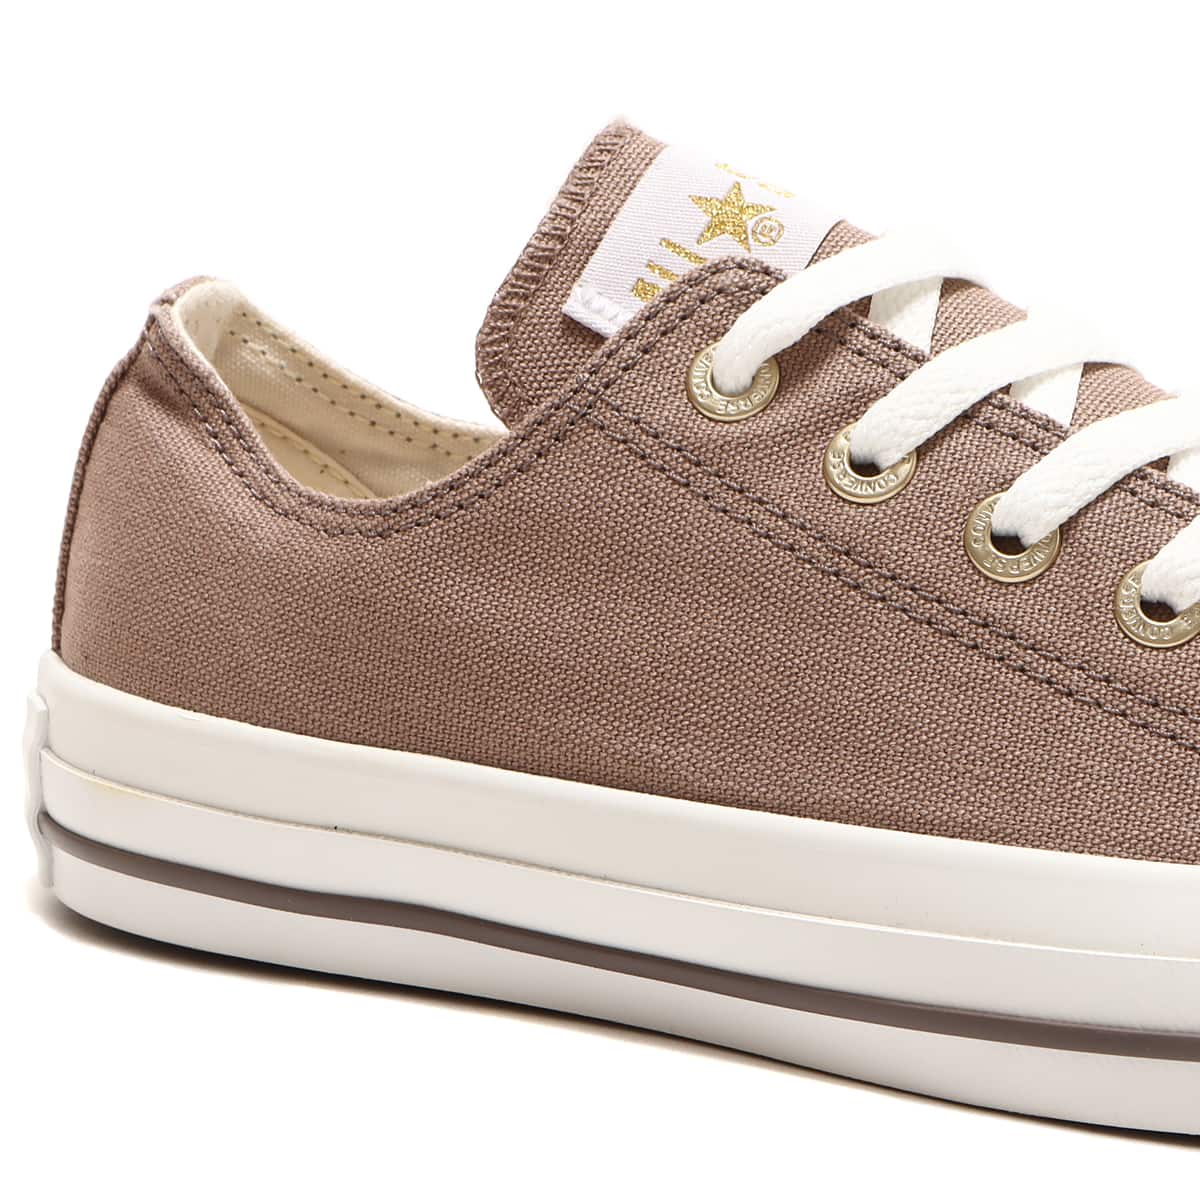 CONVERSE ALL STAR FLAT EYELETS CG OX TAUPE 23SS-I